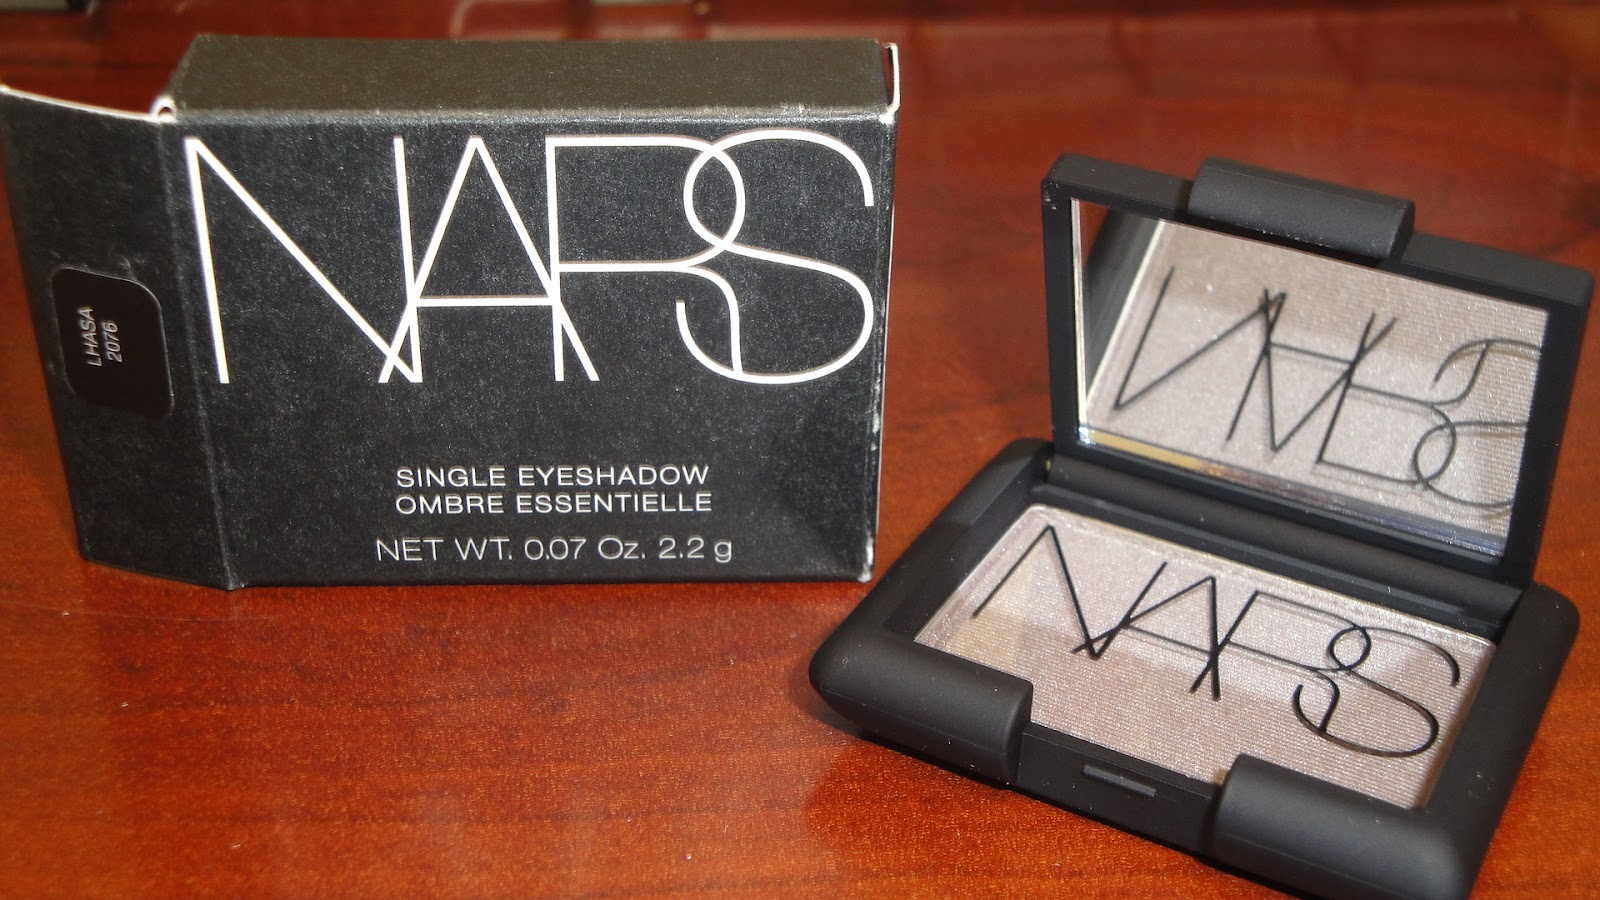 Jayded Dreaming Beauty Blog : LHASA NARS SINGLE EYESHADOW - SWATCHES AND  REVIEW